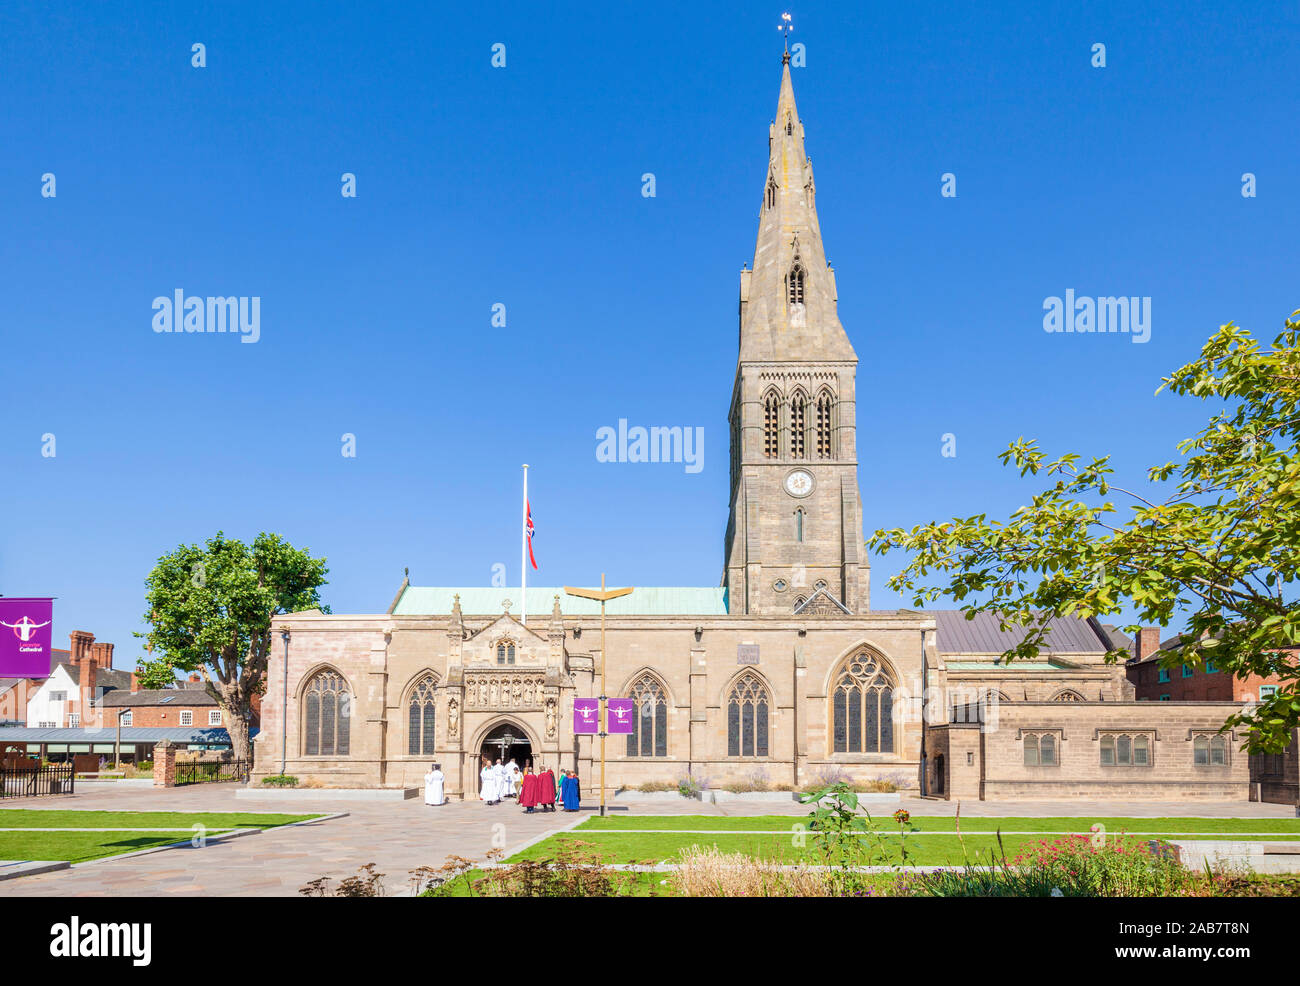 Leicester Cathedral, burial site of King Richard III, city centre, Leicester, Leicestershire, England, United Kingdom, Europe Stock Photo